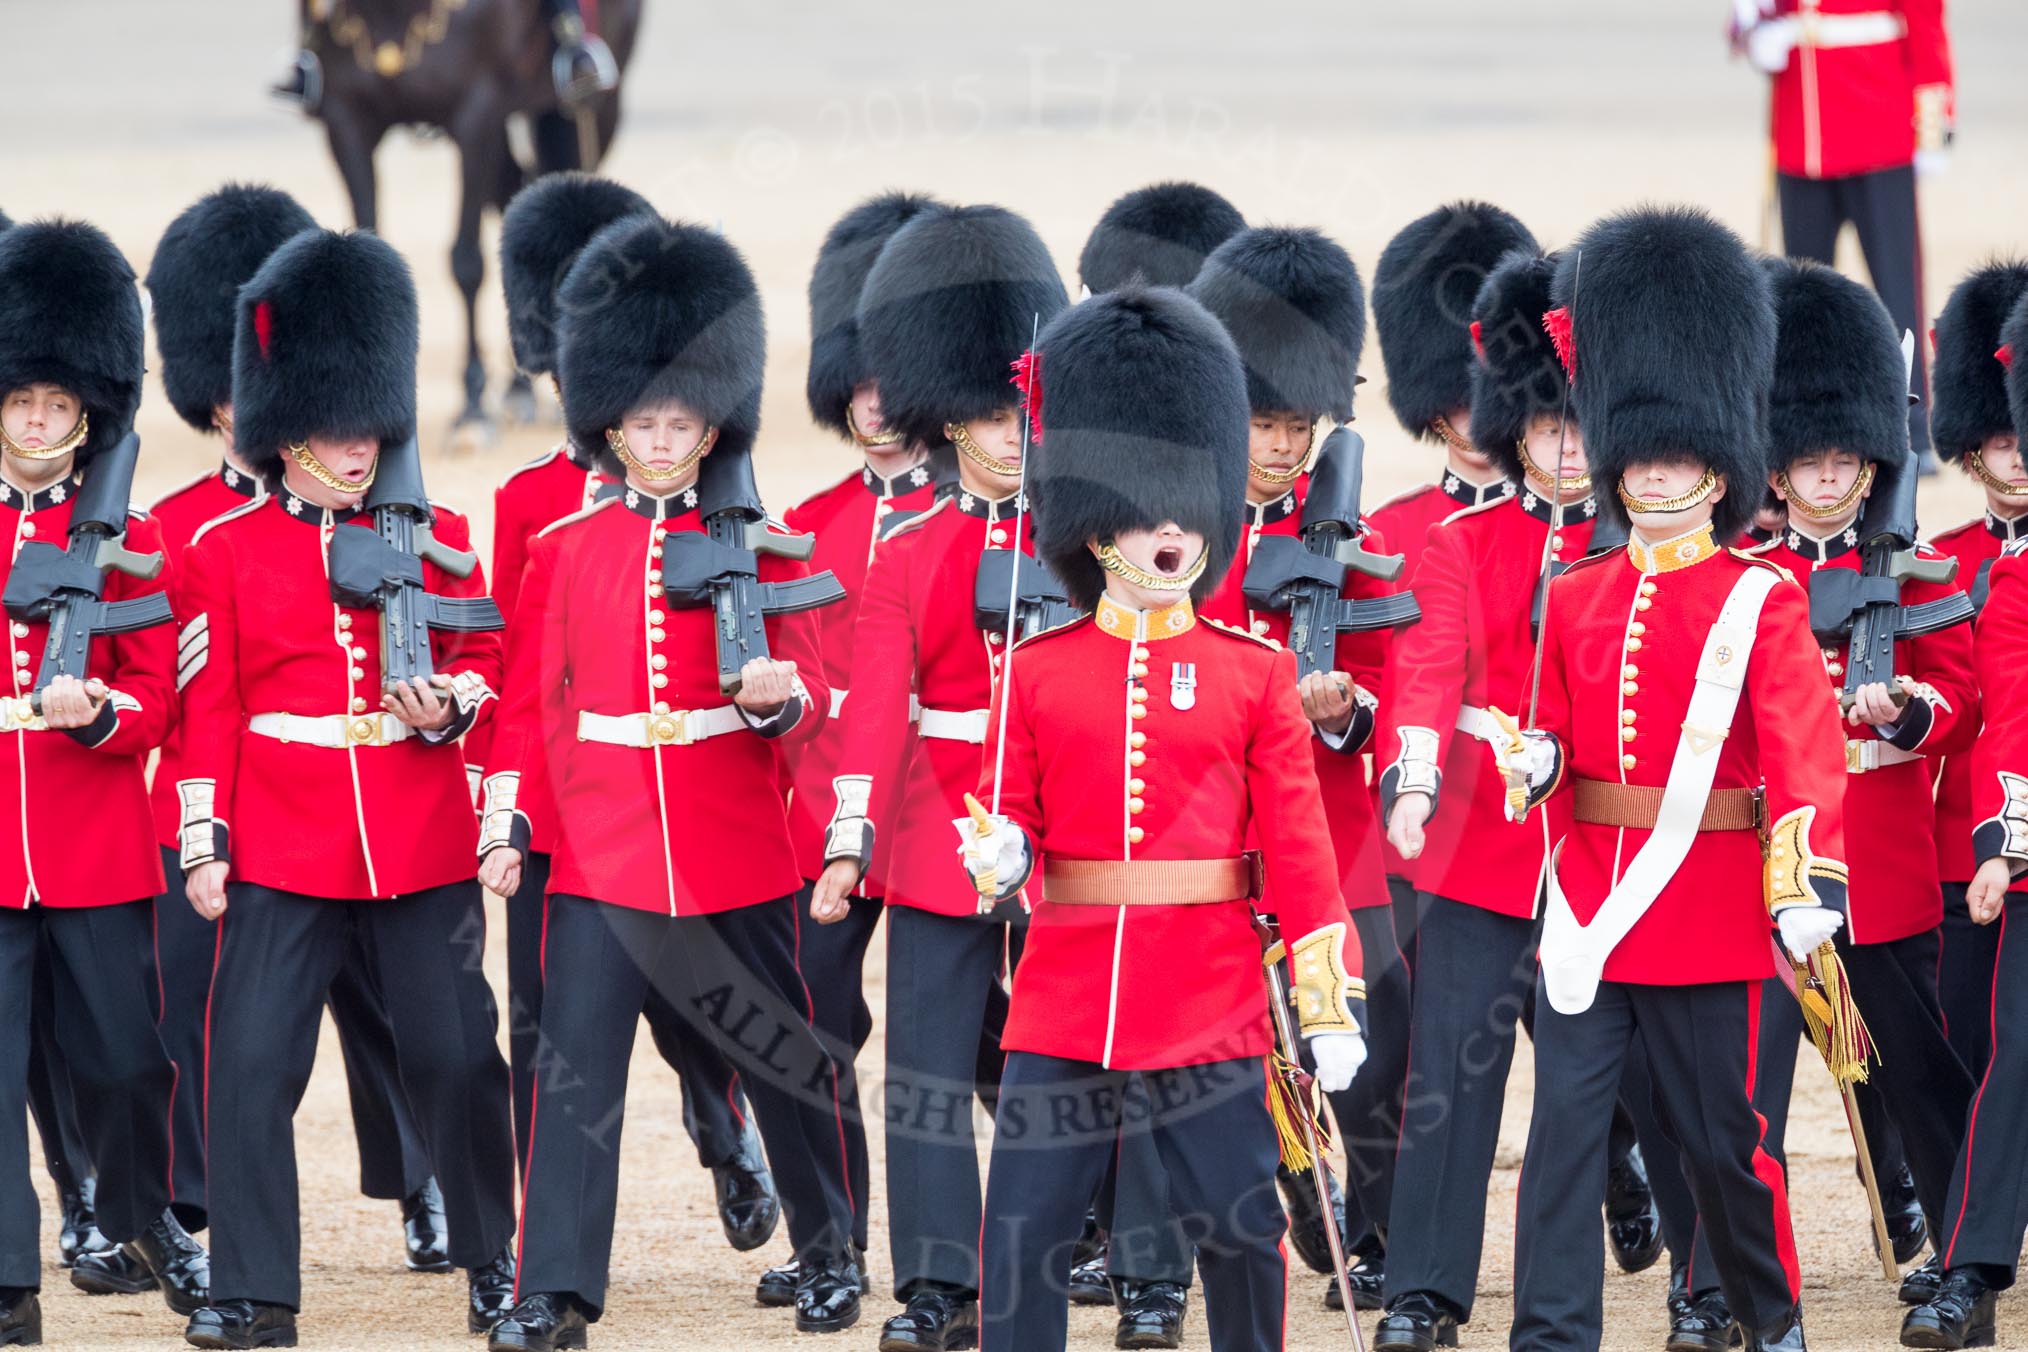 Trooping the Colour 2016.
Horse Guards Parade, Westminster,
London SW1A,
London,
United Kingdom,
on 11 June 2016 at 11:18, image #478